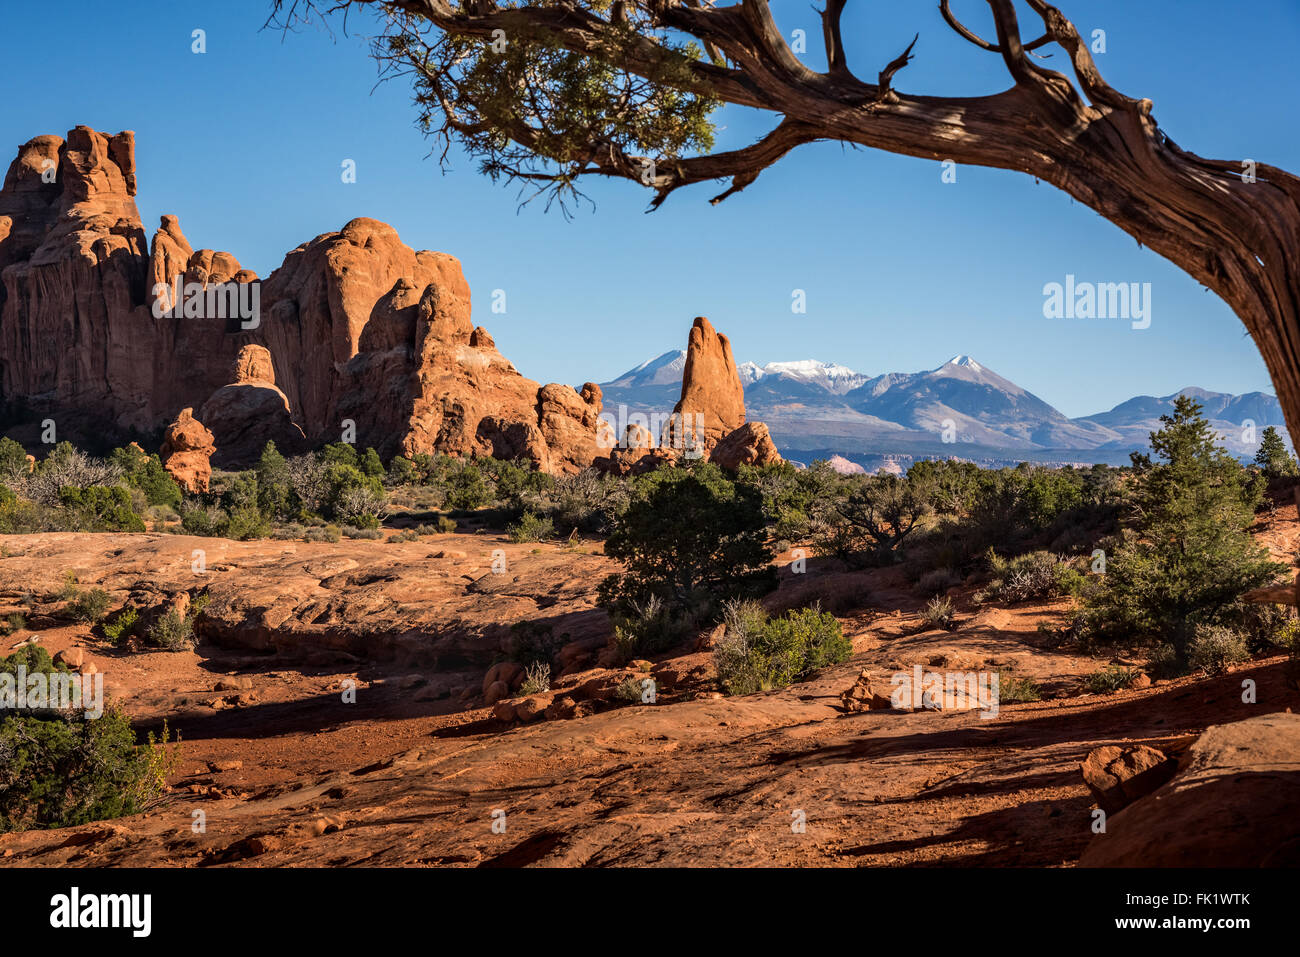 Arches National Park is a landscape of contrasting colors, landforms and textures. Stock Photo